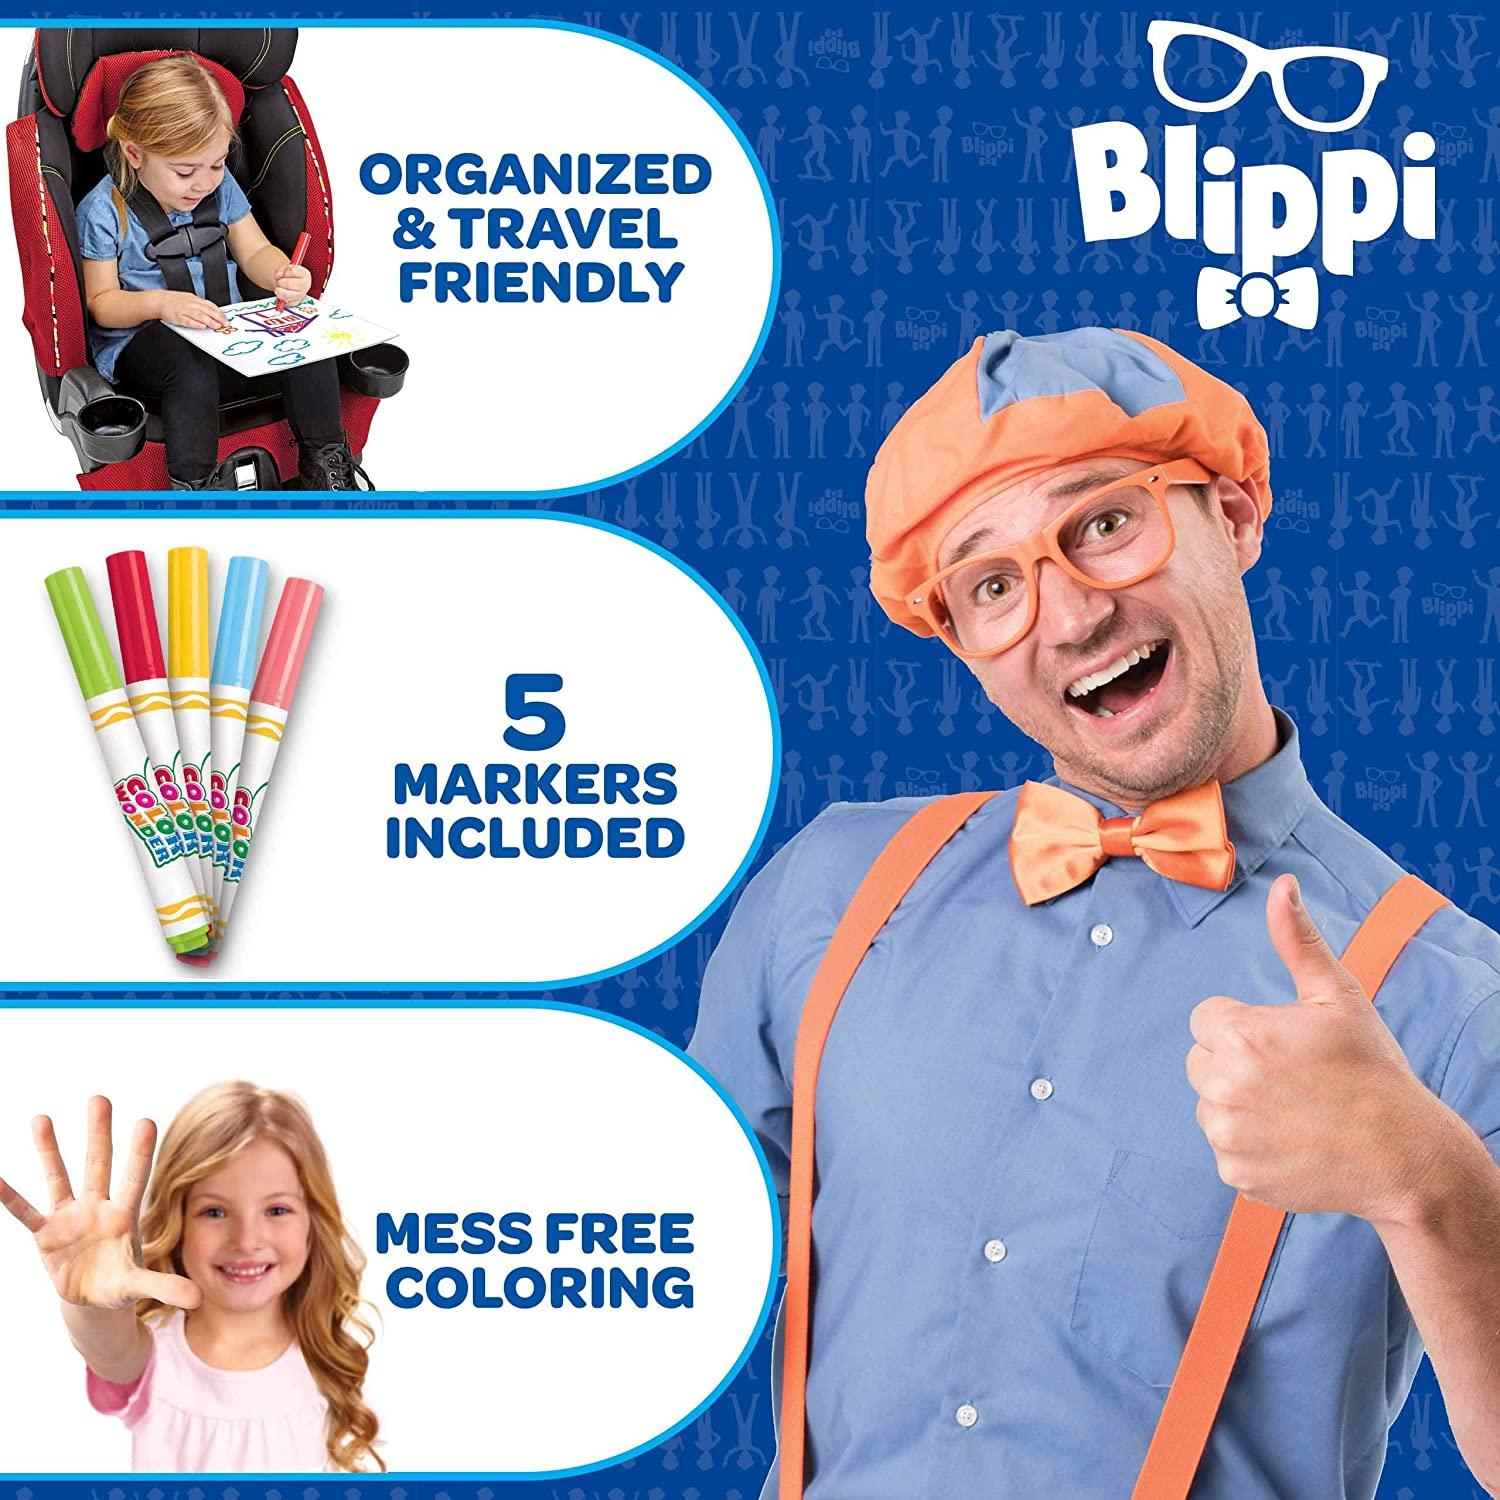 Crayola Color Wonder Blippi, Mess Free Coloring Pages & Markers